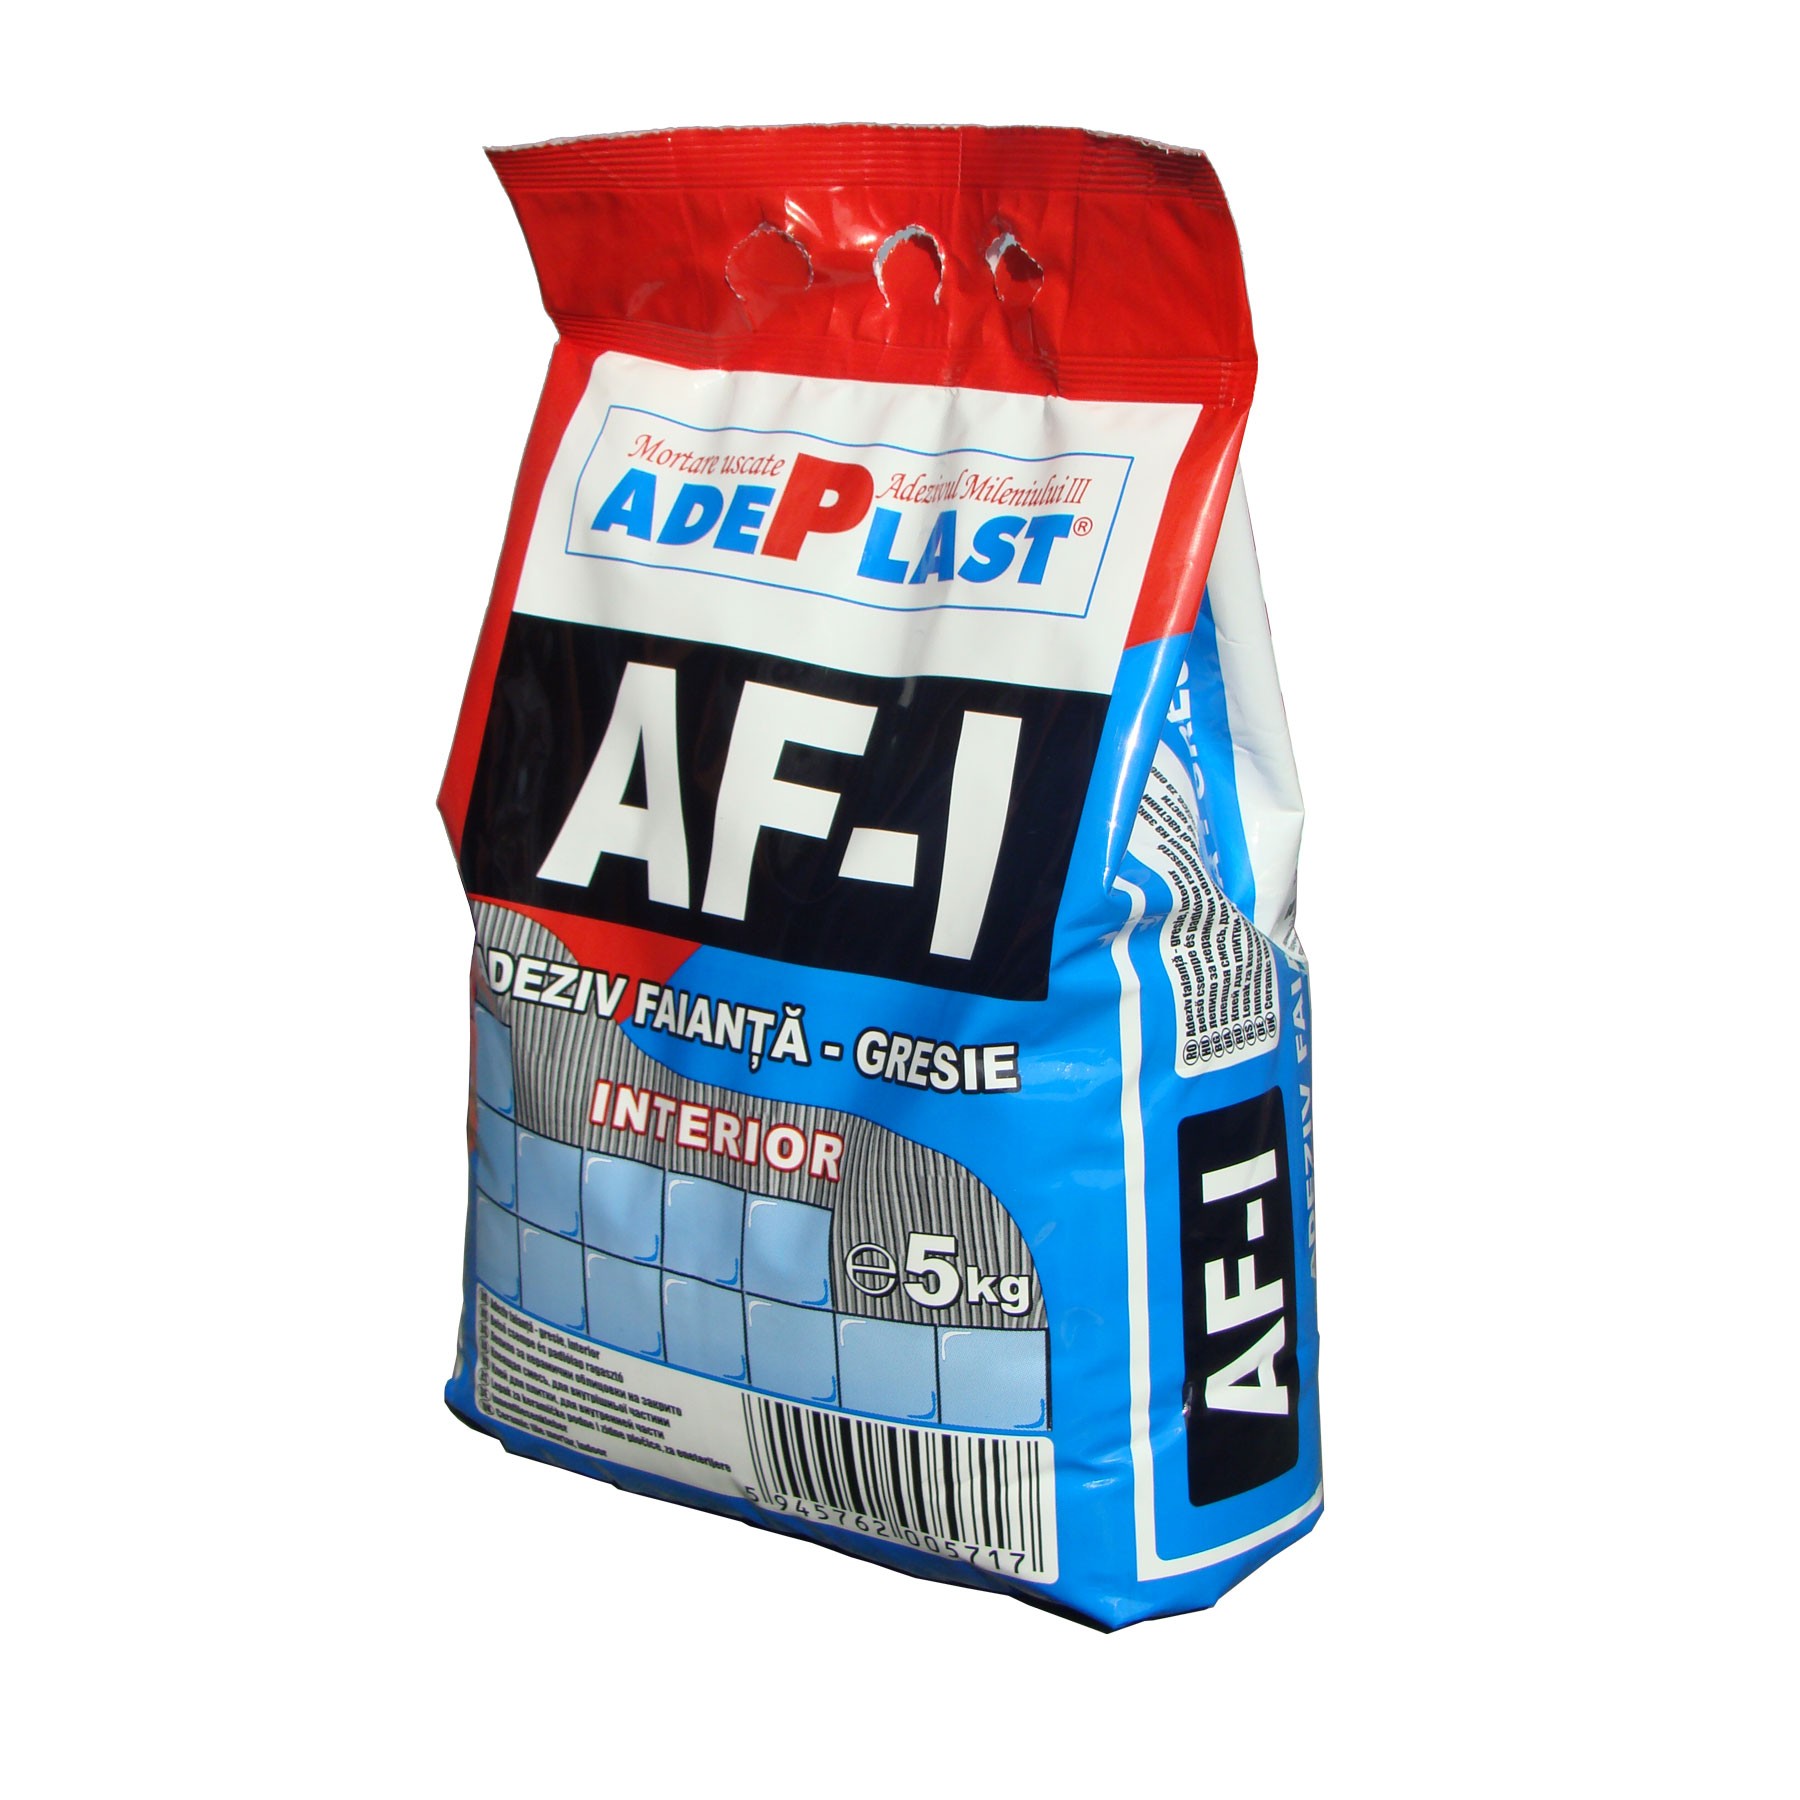 Adhesives ceramic tiles - Adhesive for tiles and tiles AF-I Adeplast 5 kg, https:maxbau.ro